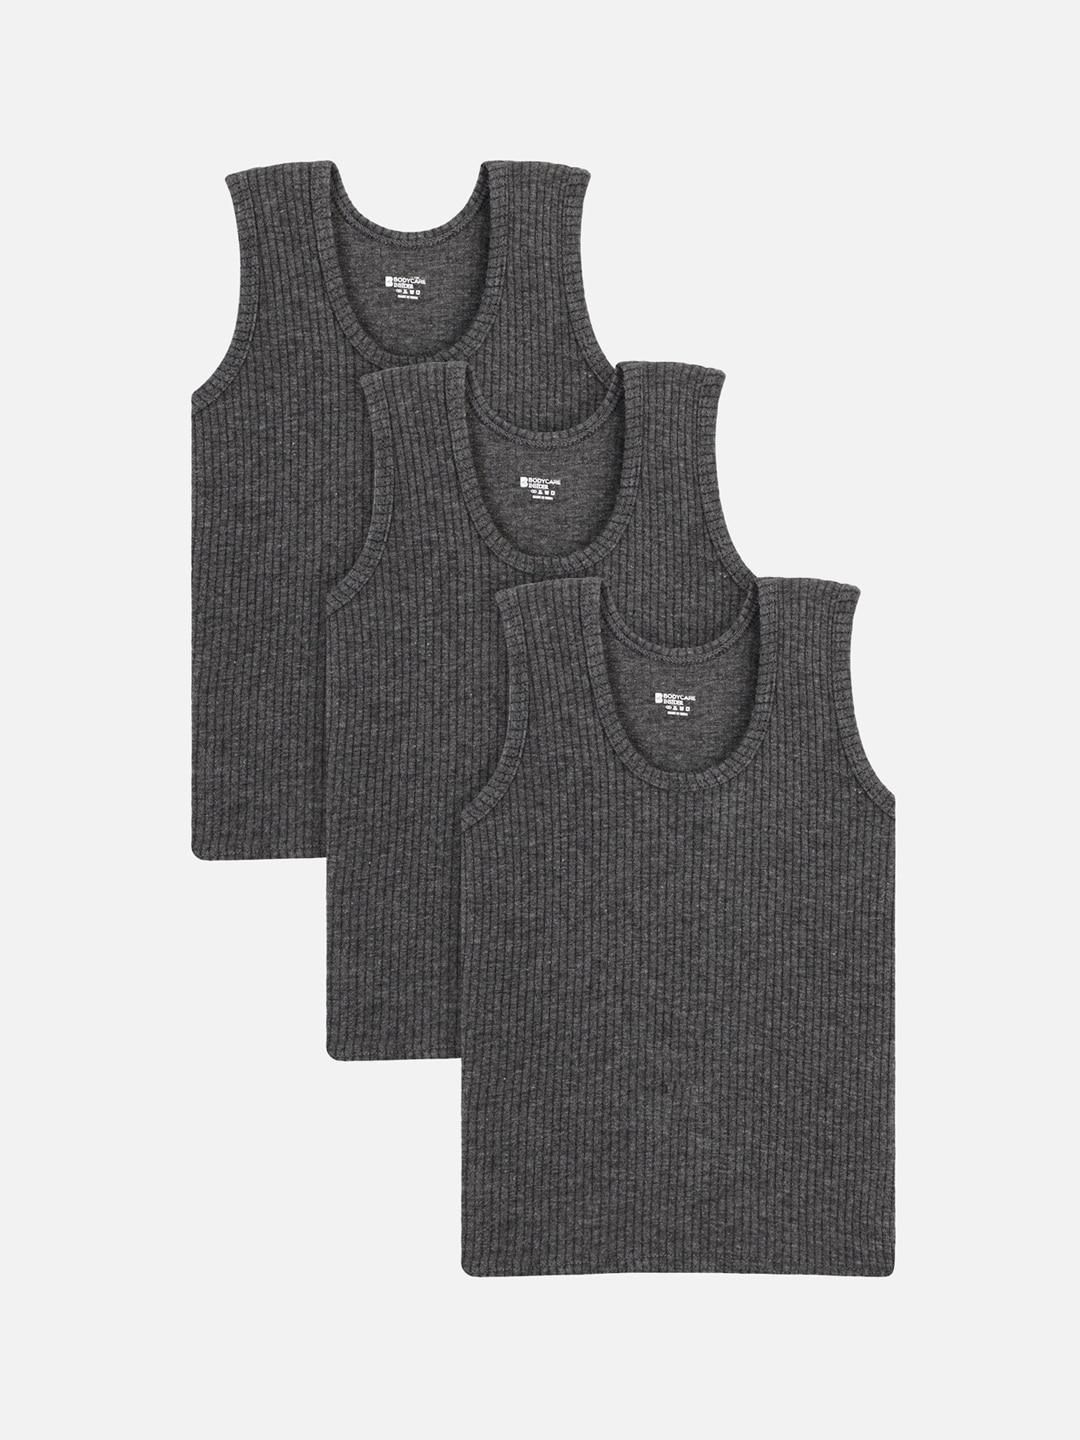 bodycare-insider-unisex-kids-pack-of-3-charcoal-grey-self-design-thermal-tops